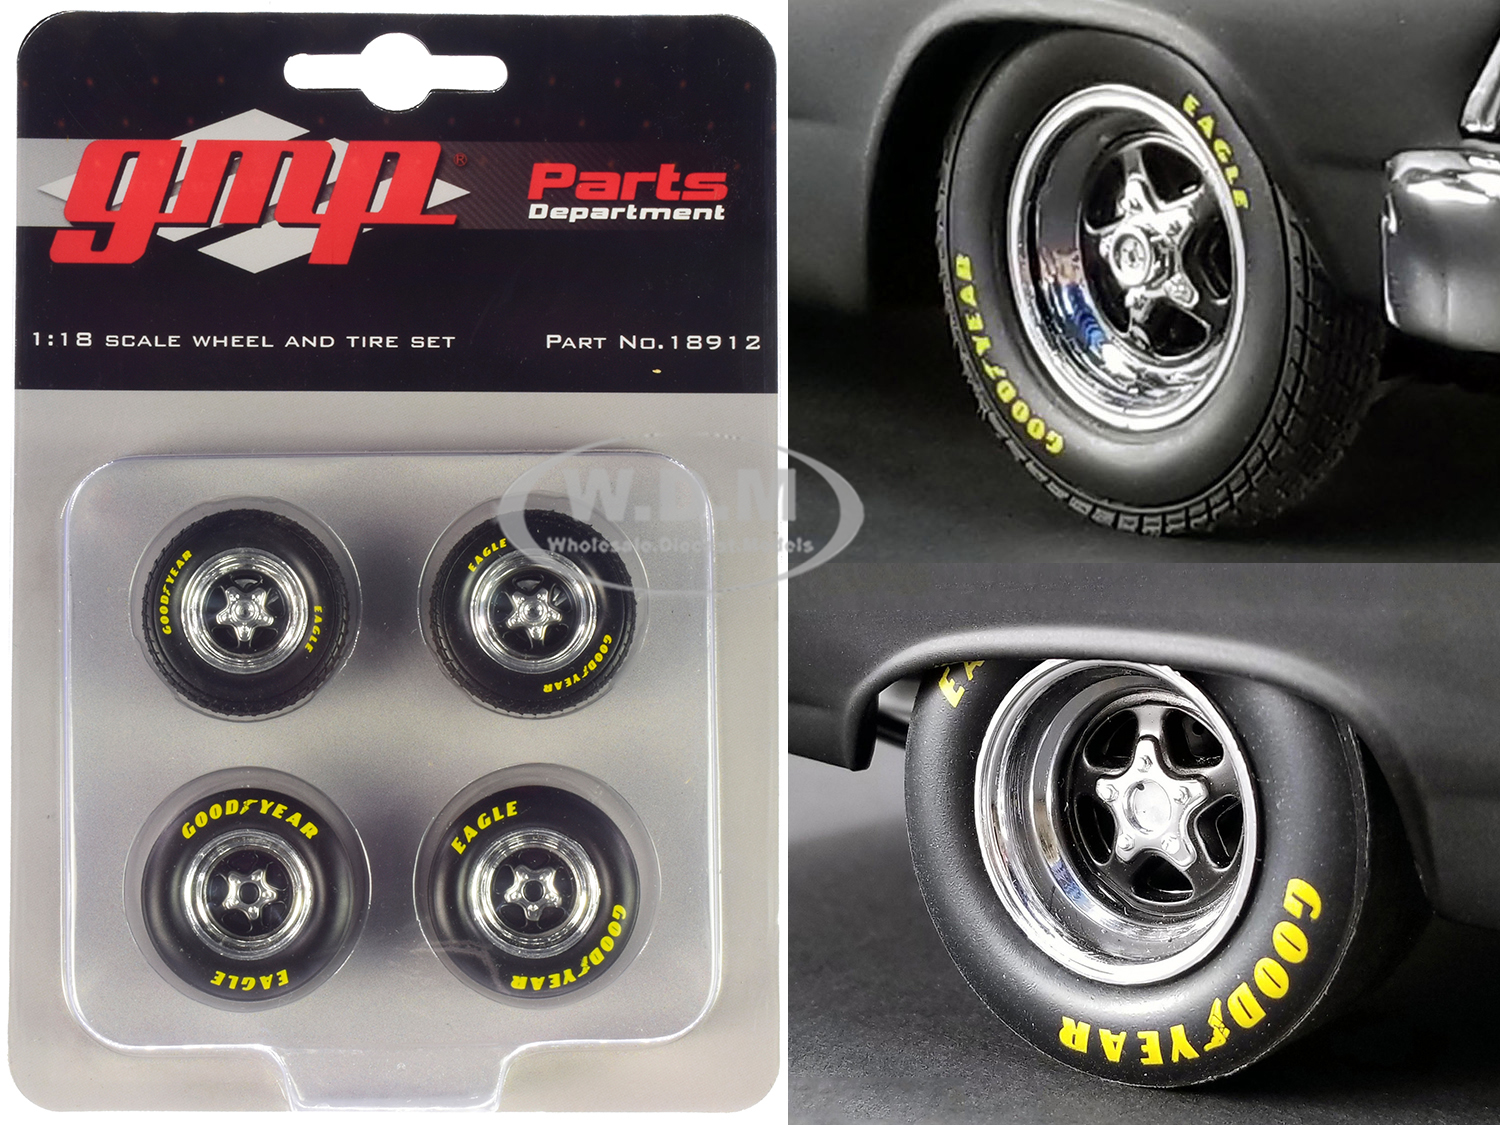 Pro Star 5-spoke Drag Wheels And Tires Set Of 4 Pieces From "pork Chops 1966 Ford Fairlane" 1/18 By Gmp